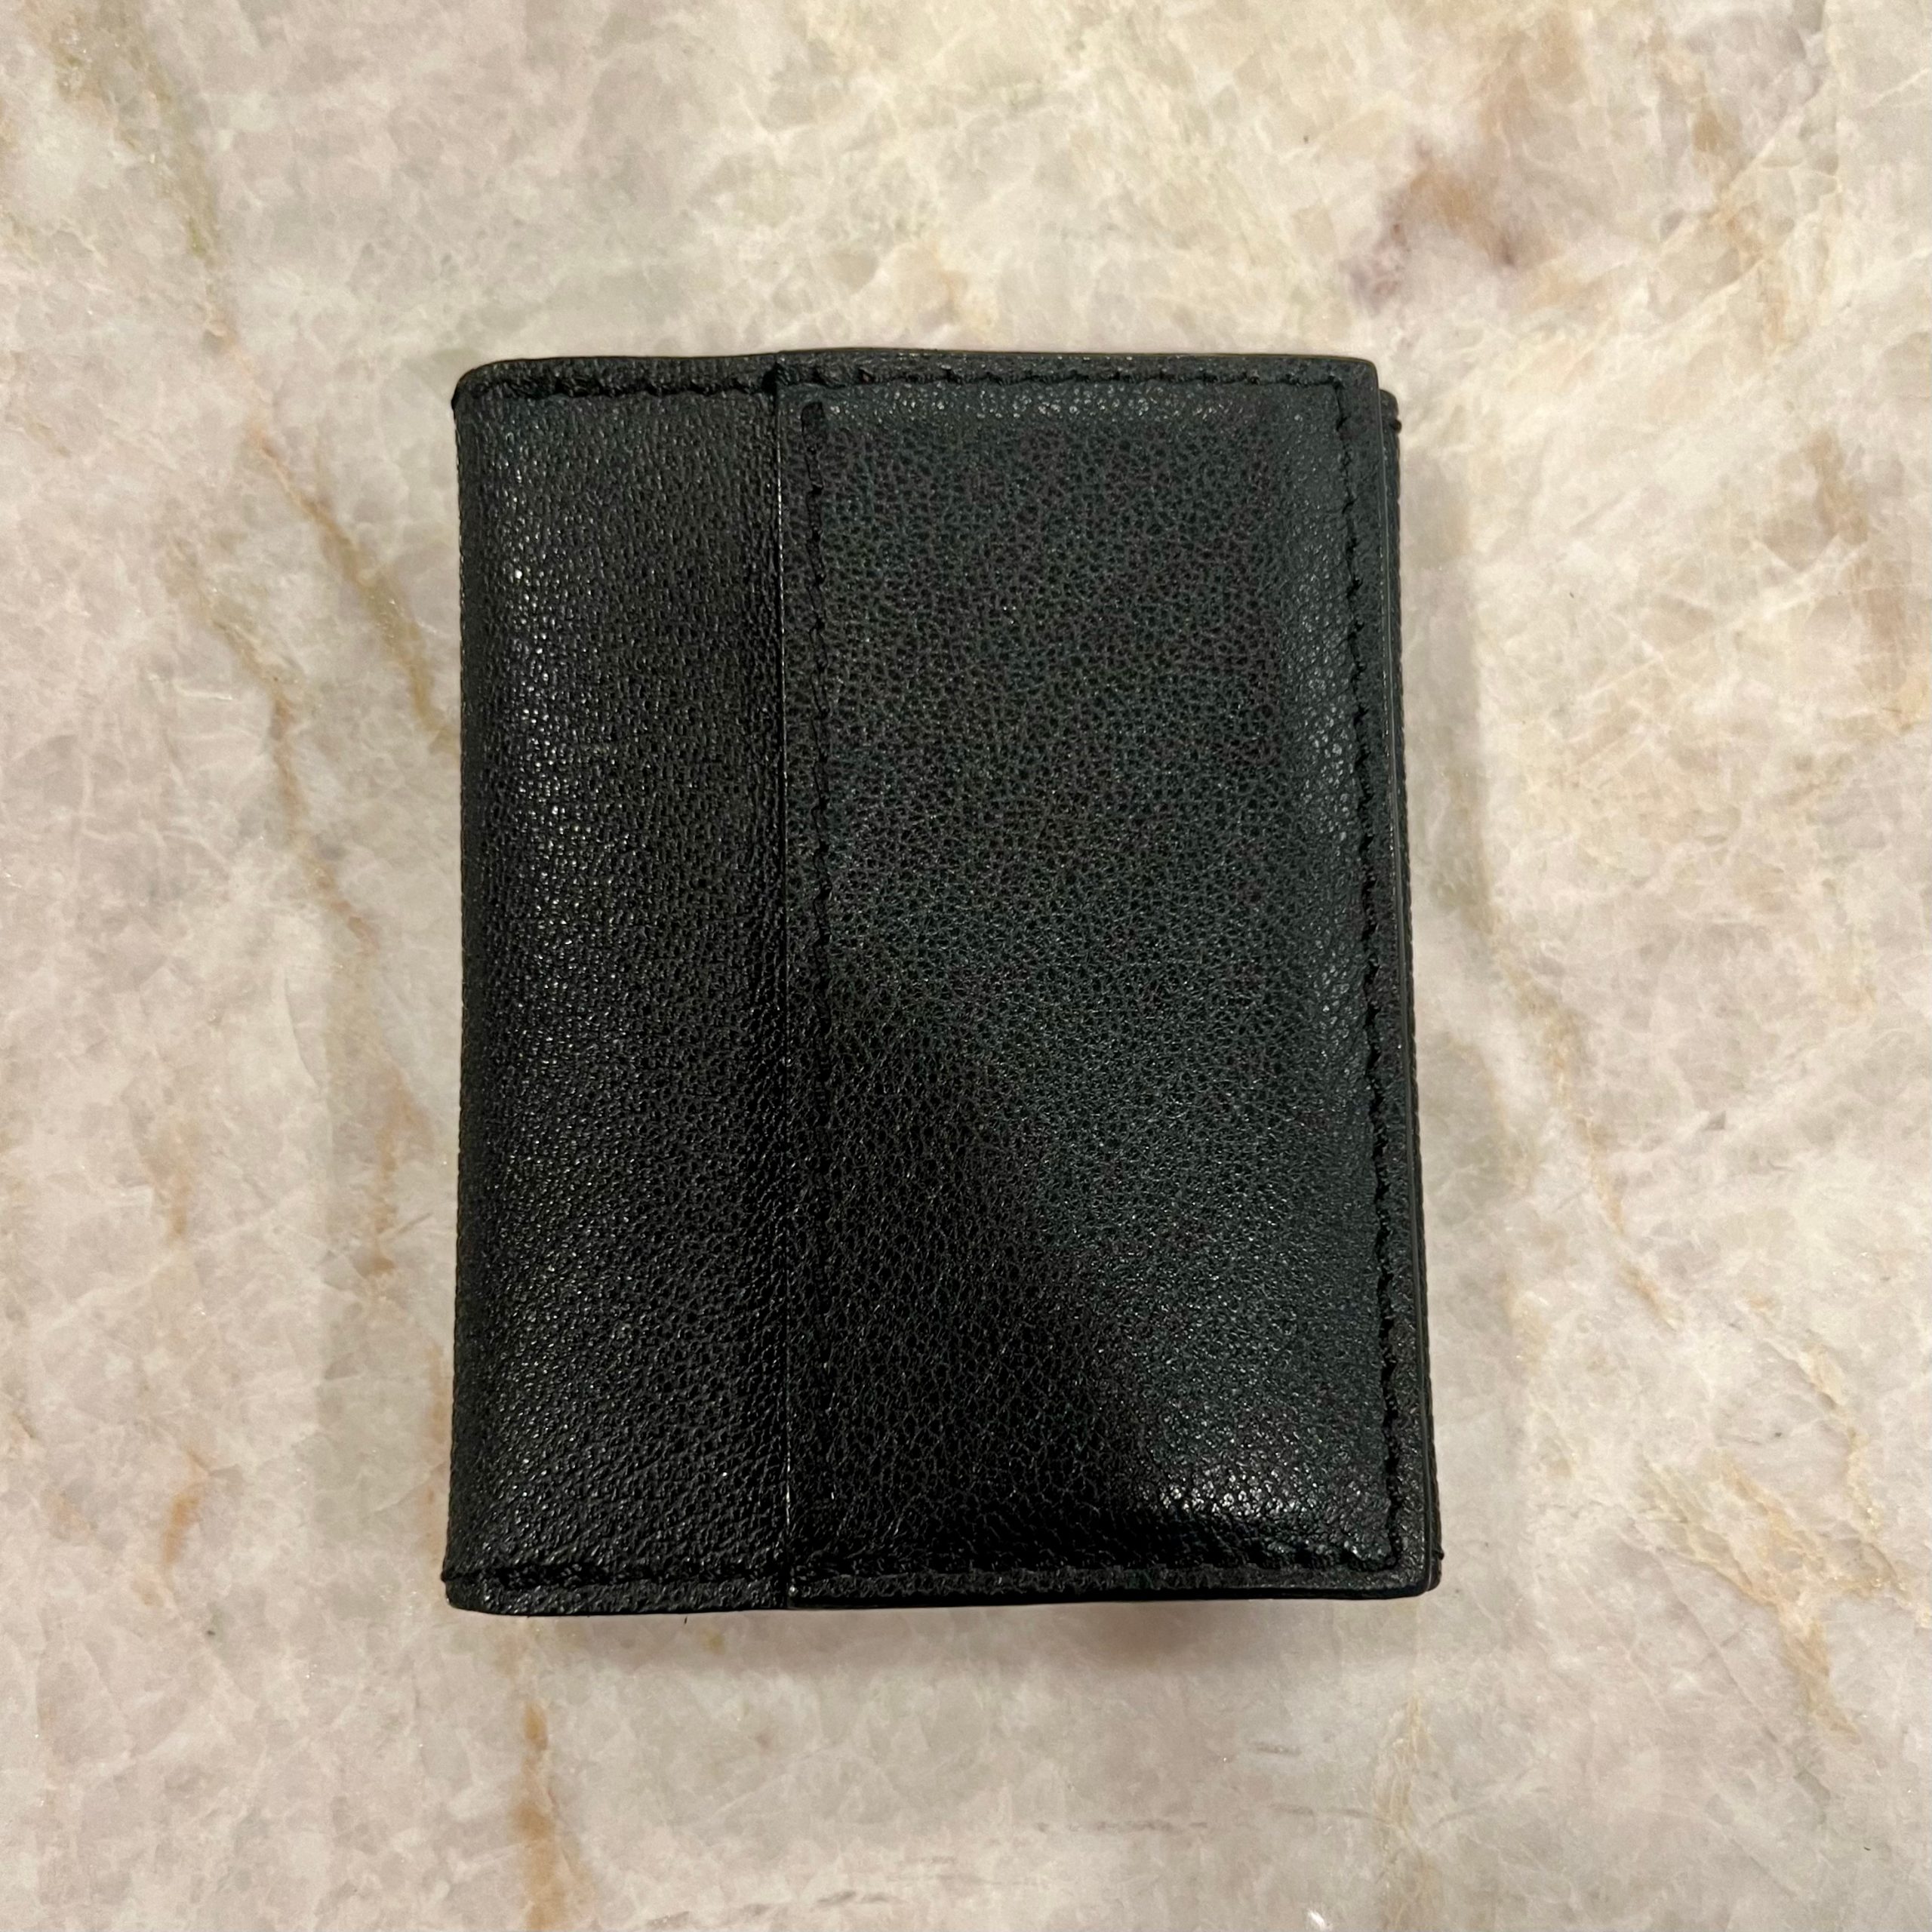 Passenger Wallet by Plainsight shown closed